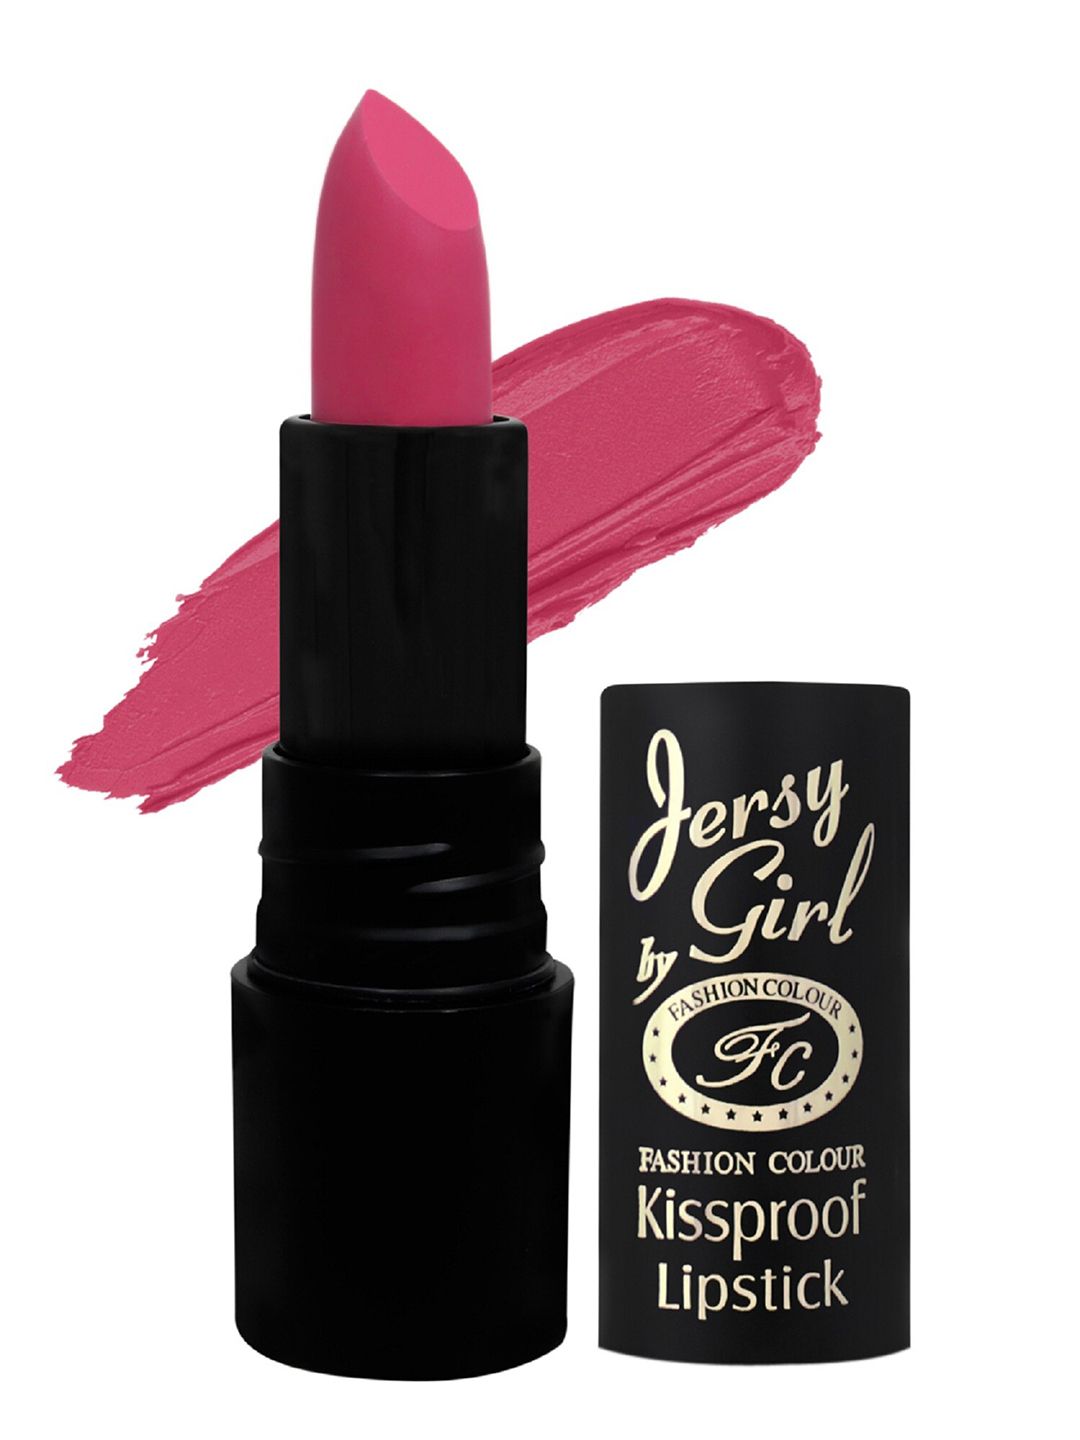 Fashion Colour Jersy Girl Kiss proof Lipstick - Baby Lavender 16 3.8 gm Price in India